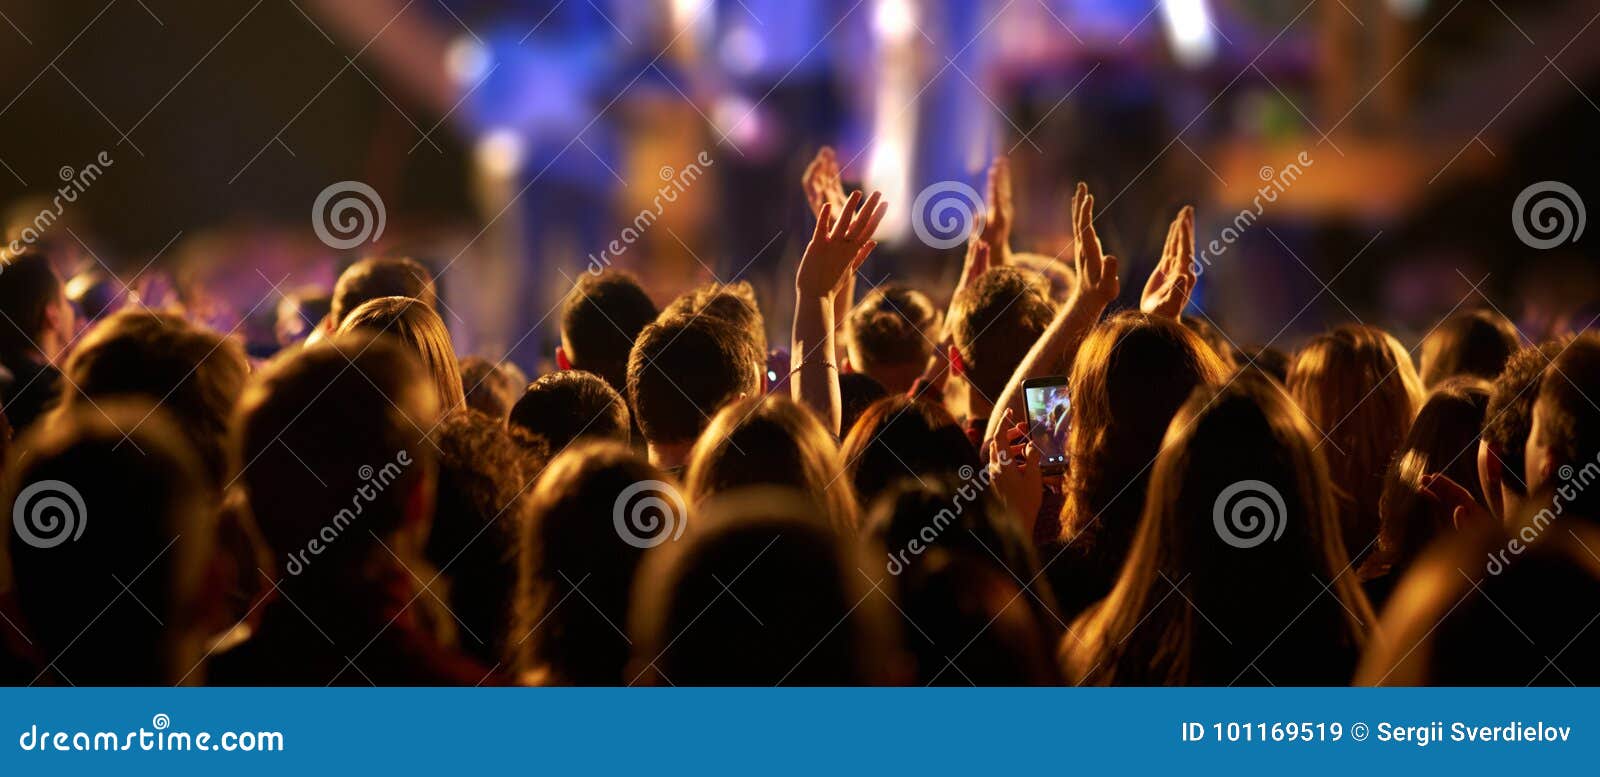 Audience with Hands Raised at a Music Festival and Lights Streaming ...